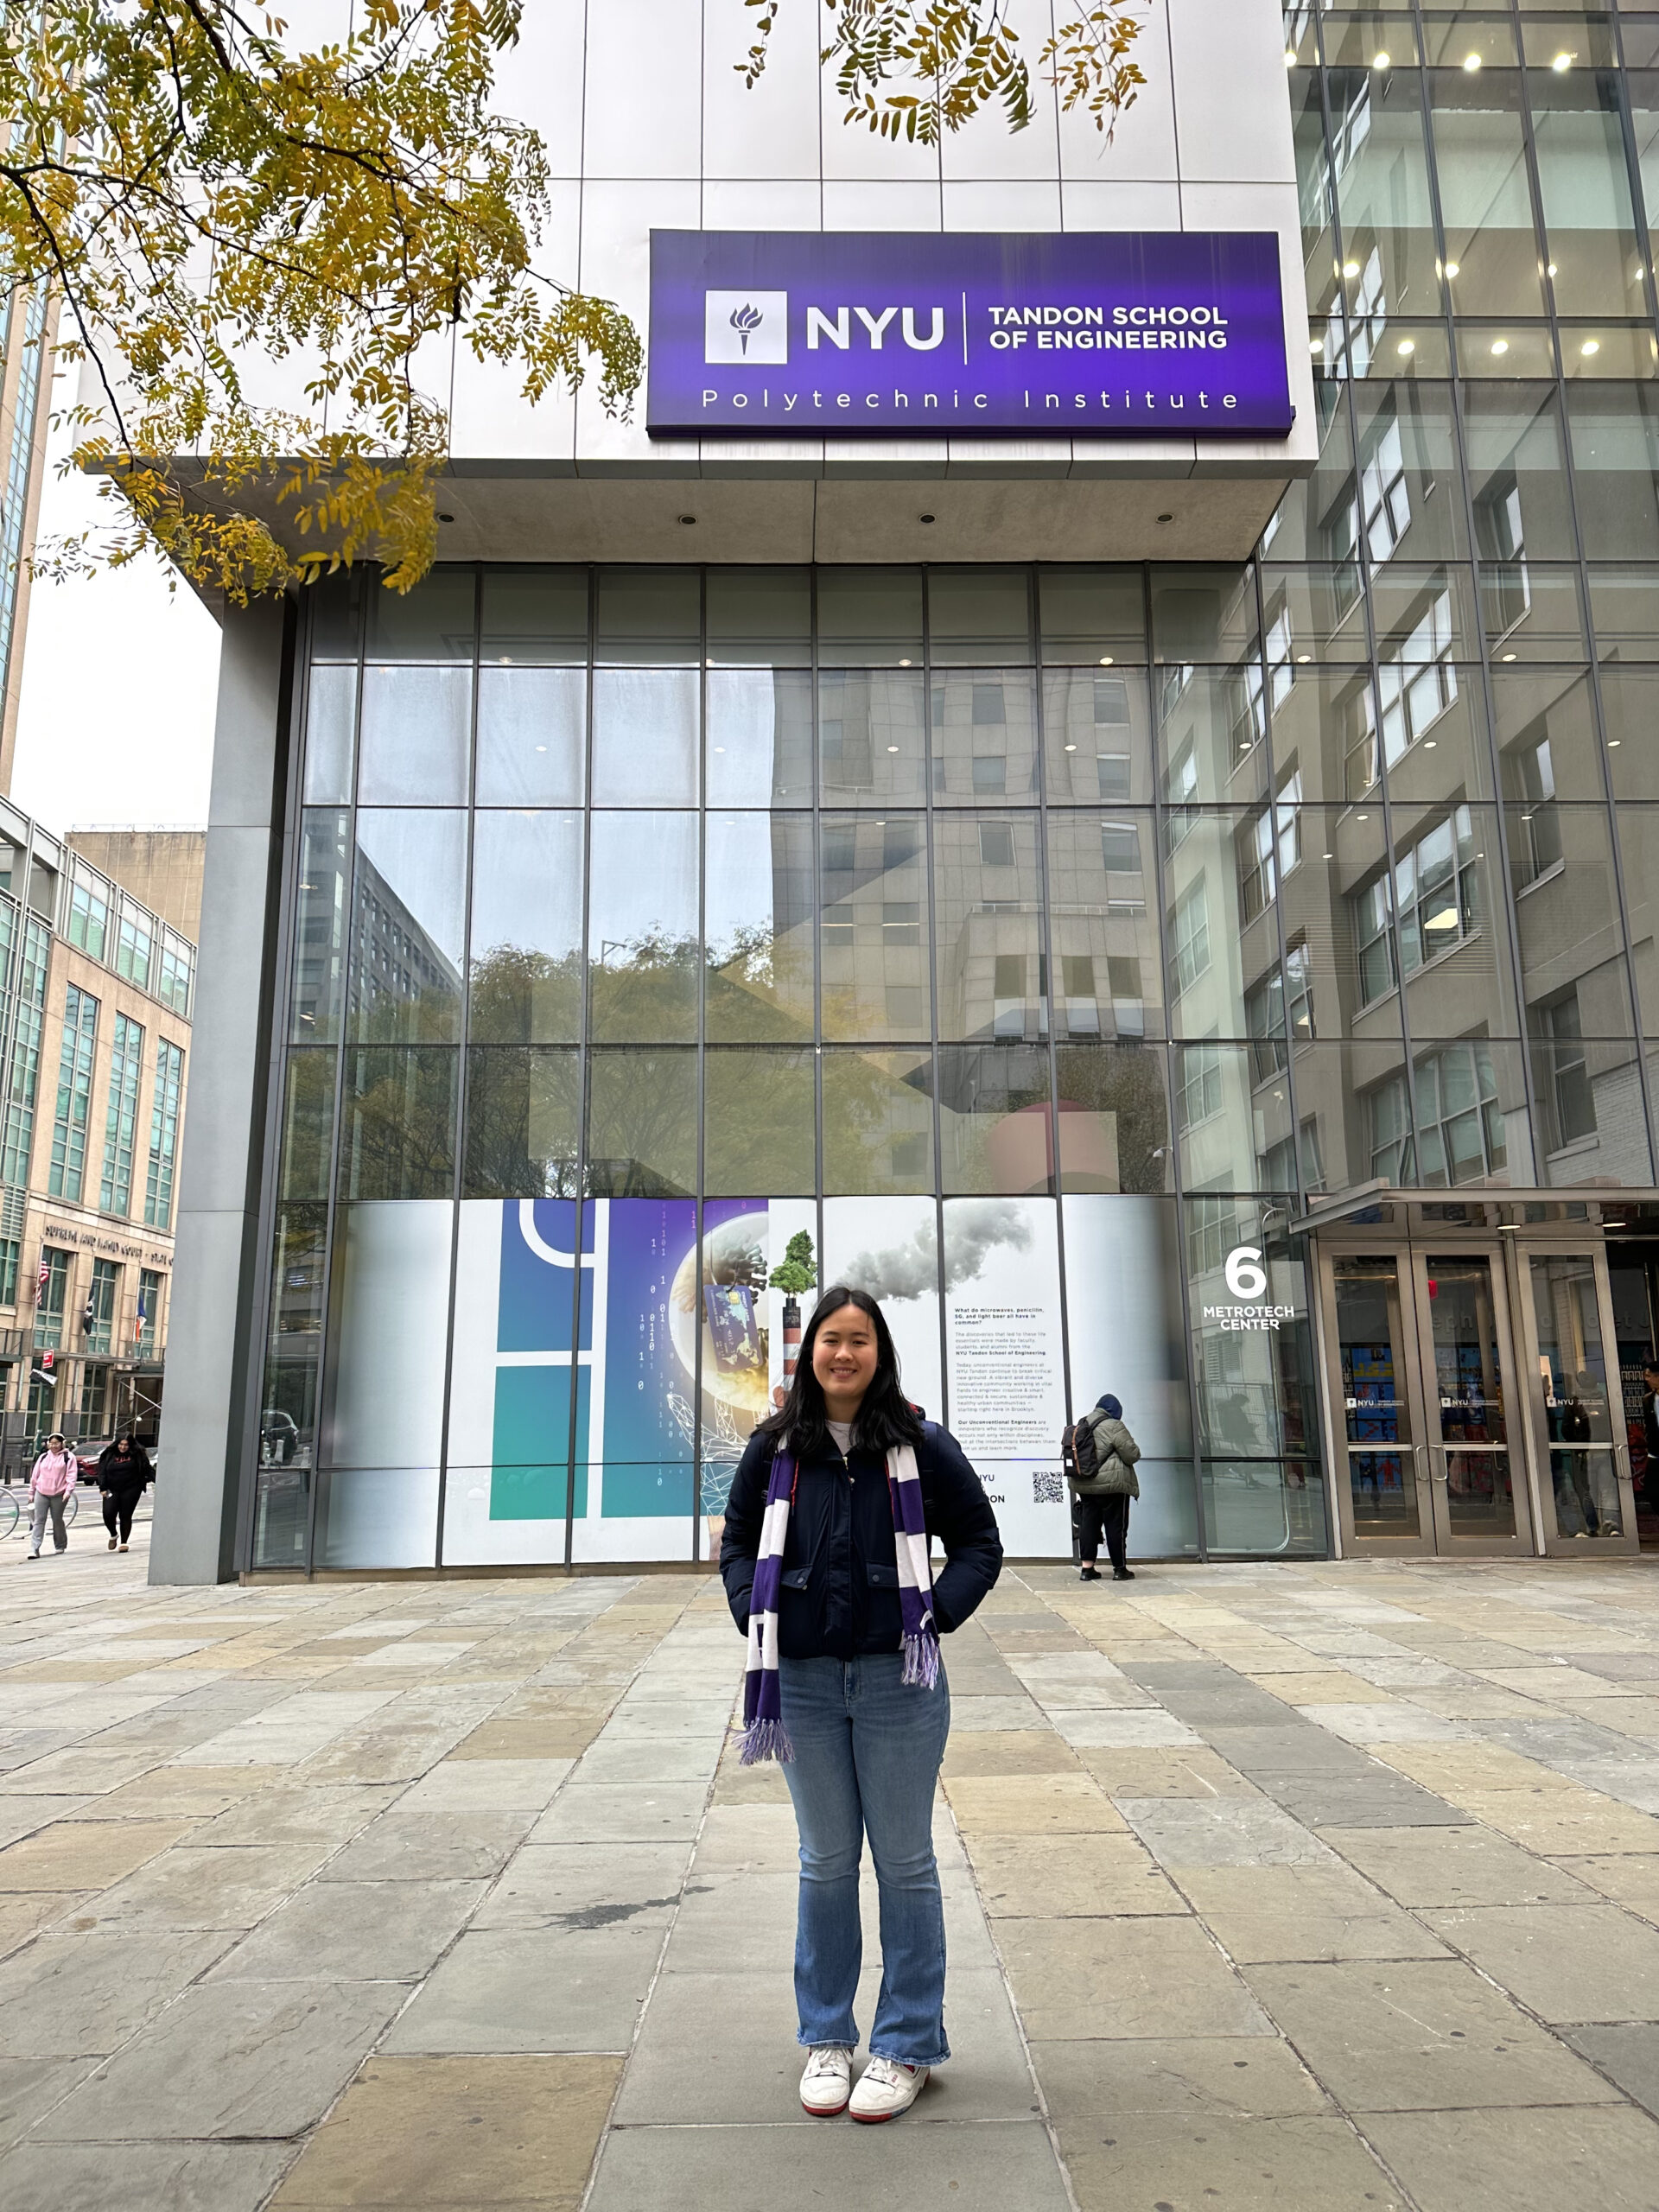 Student standing outside of a building with the NYU Tandon sign visible.